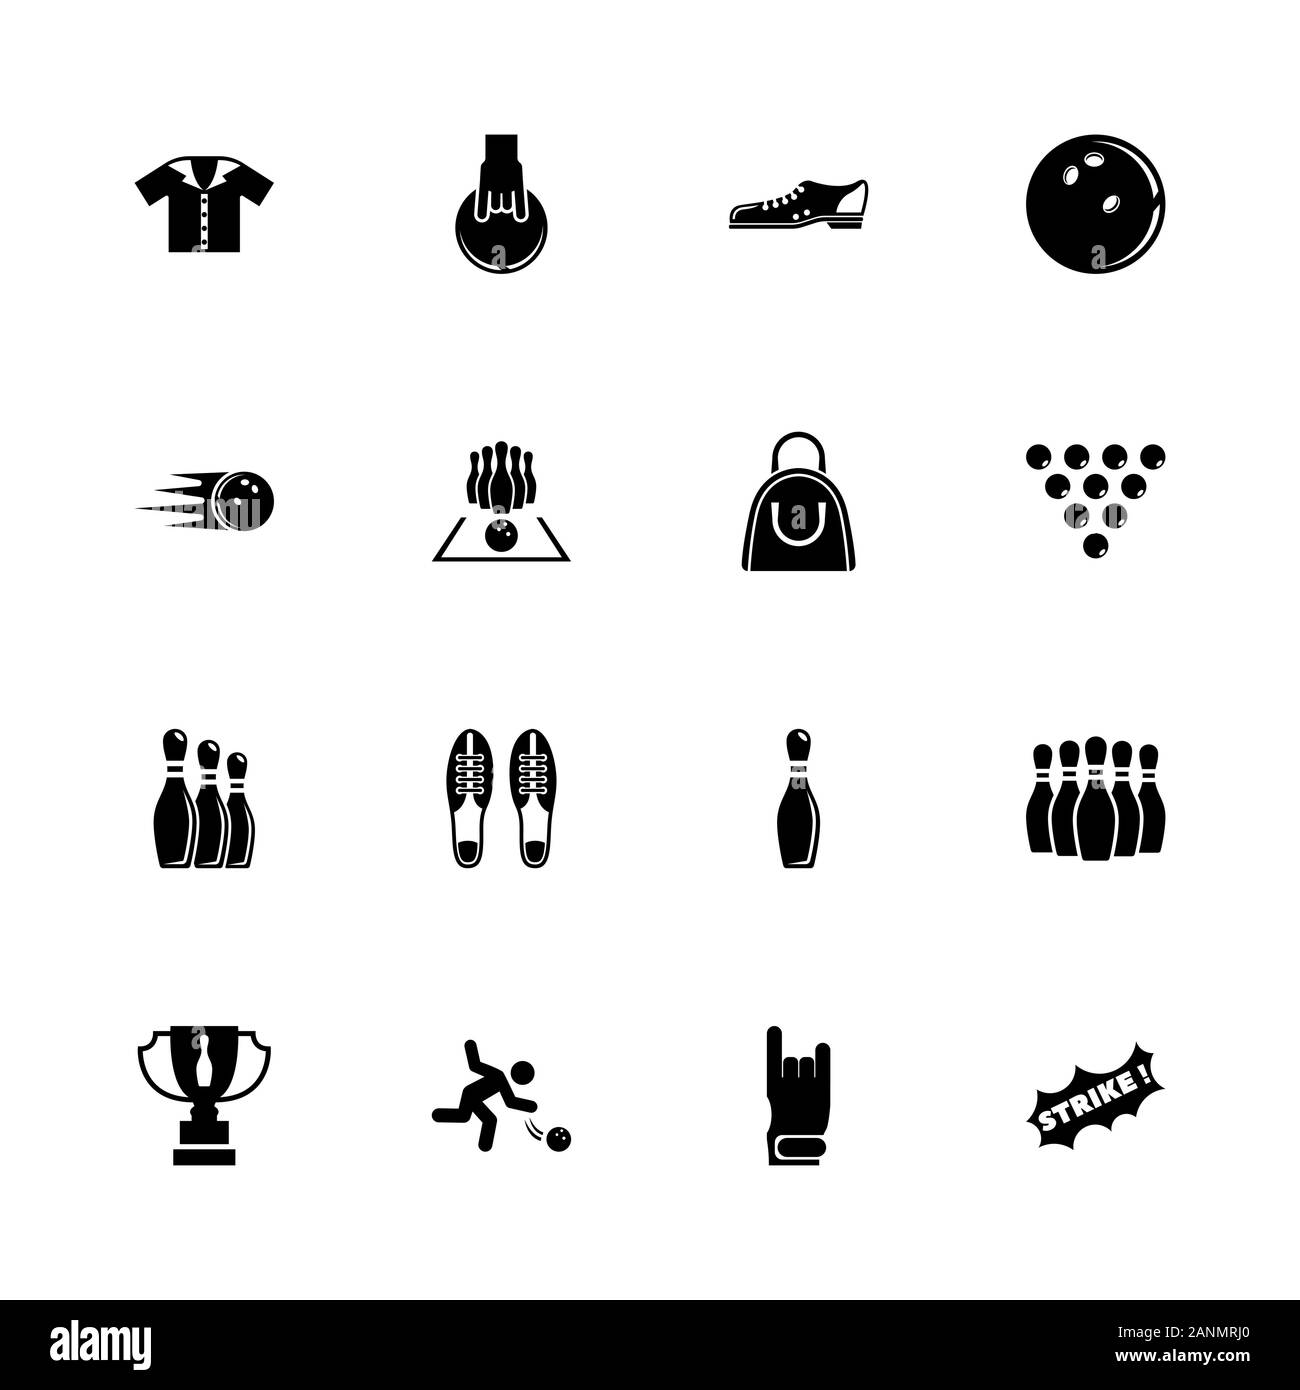 Bowling icons - Expand to any size - Change to any colour. Flat Vector Icons - Black Illustration on White Background. Stock Vector